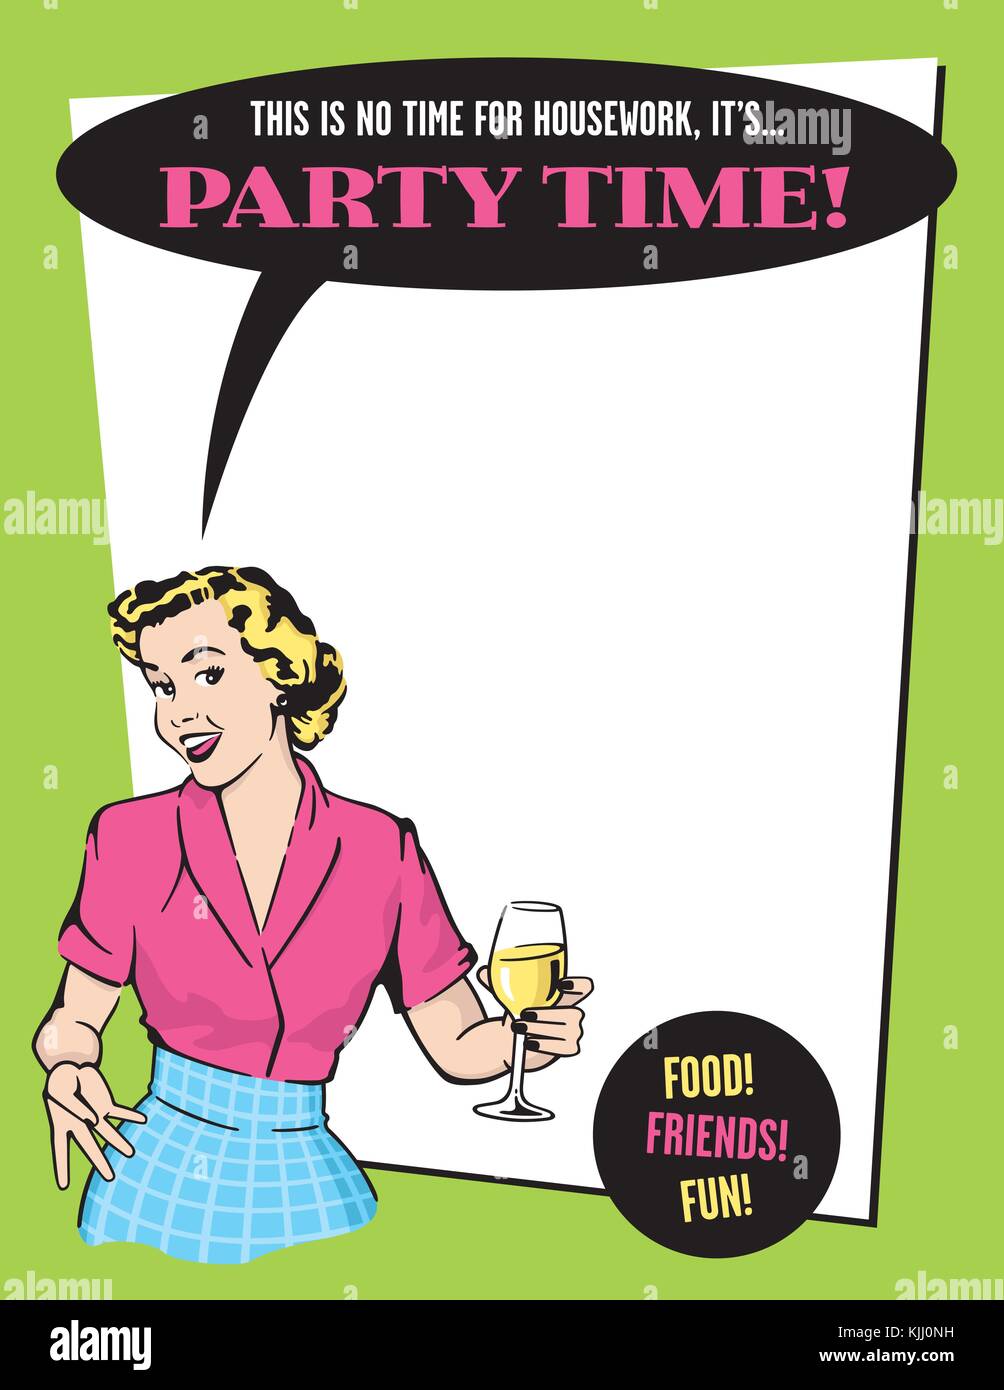 Party Time Retro Housewife Party Invitation Vector Design Template with vintage style graphics and retro woman drinking wine. Just add your details. Stock Vector